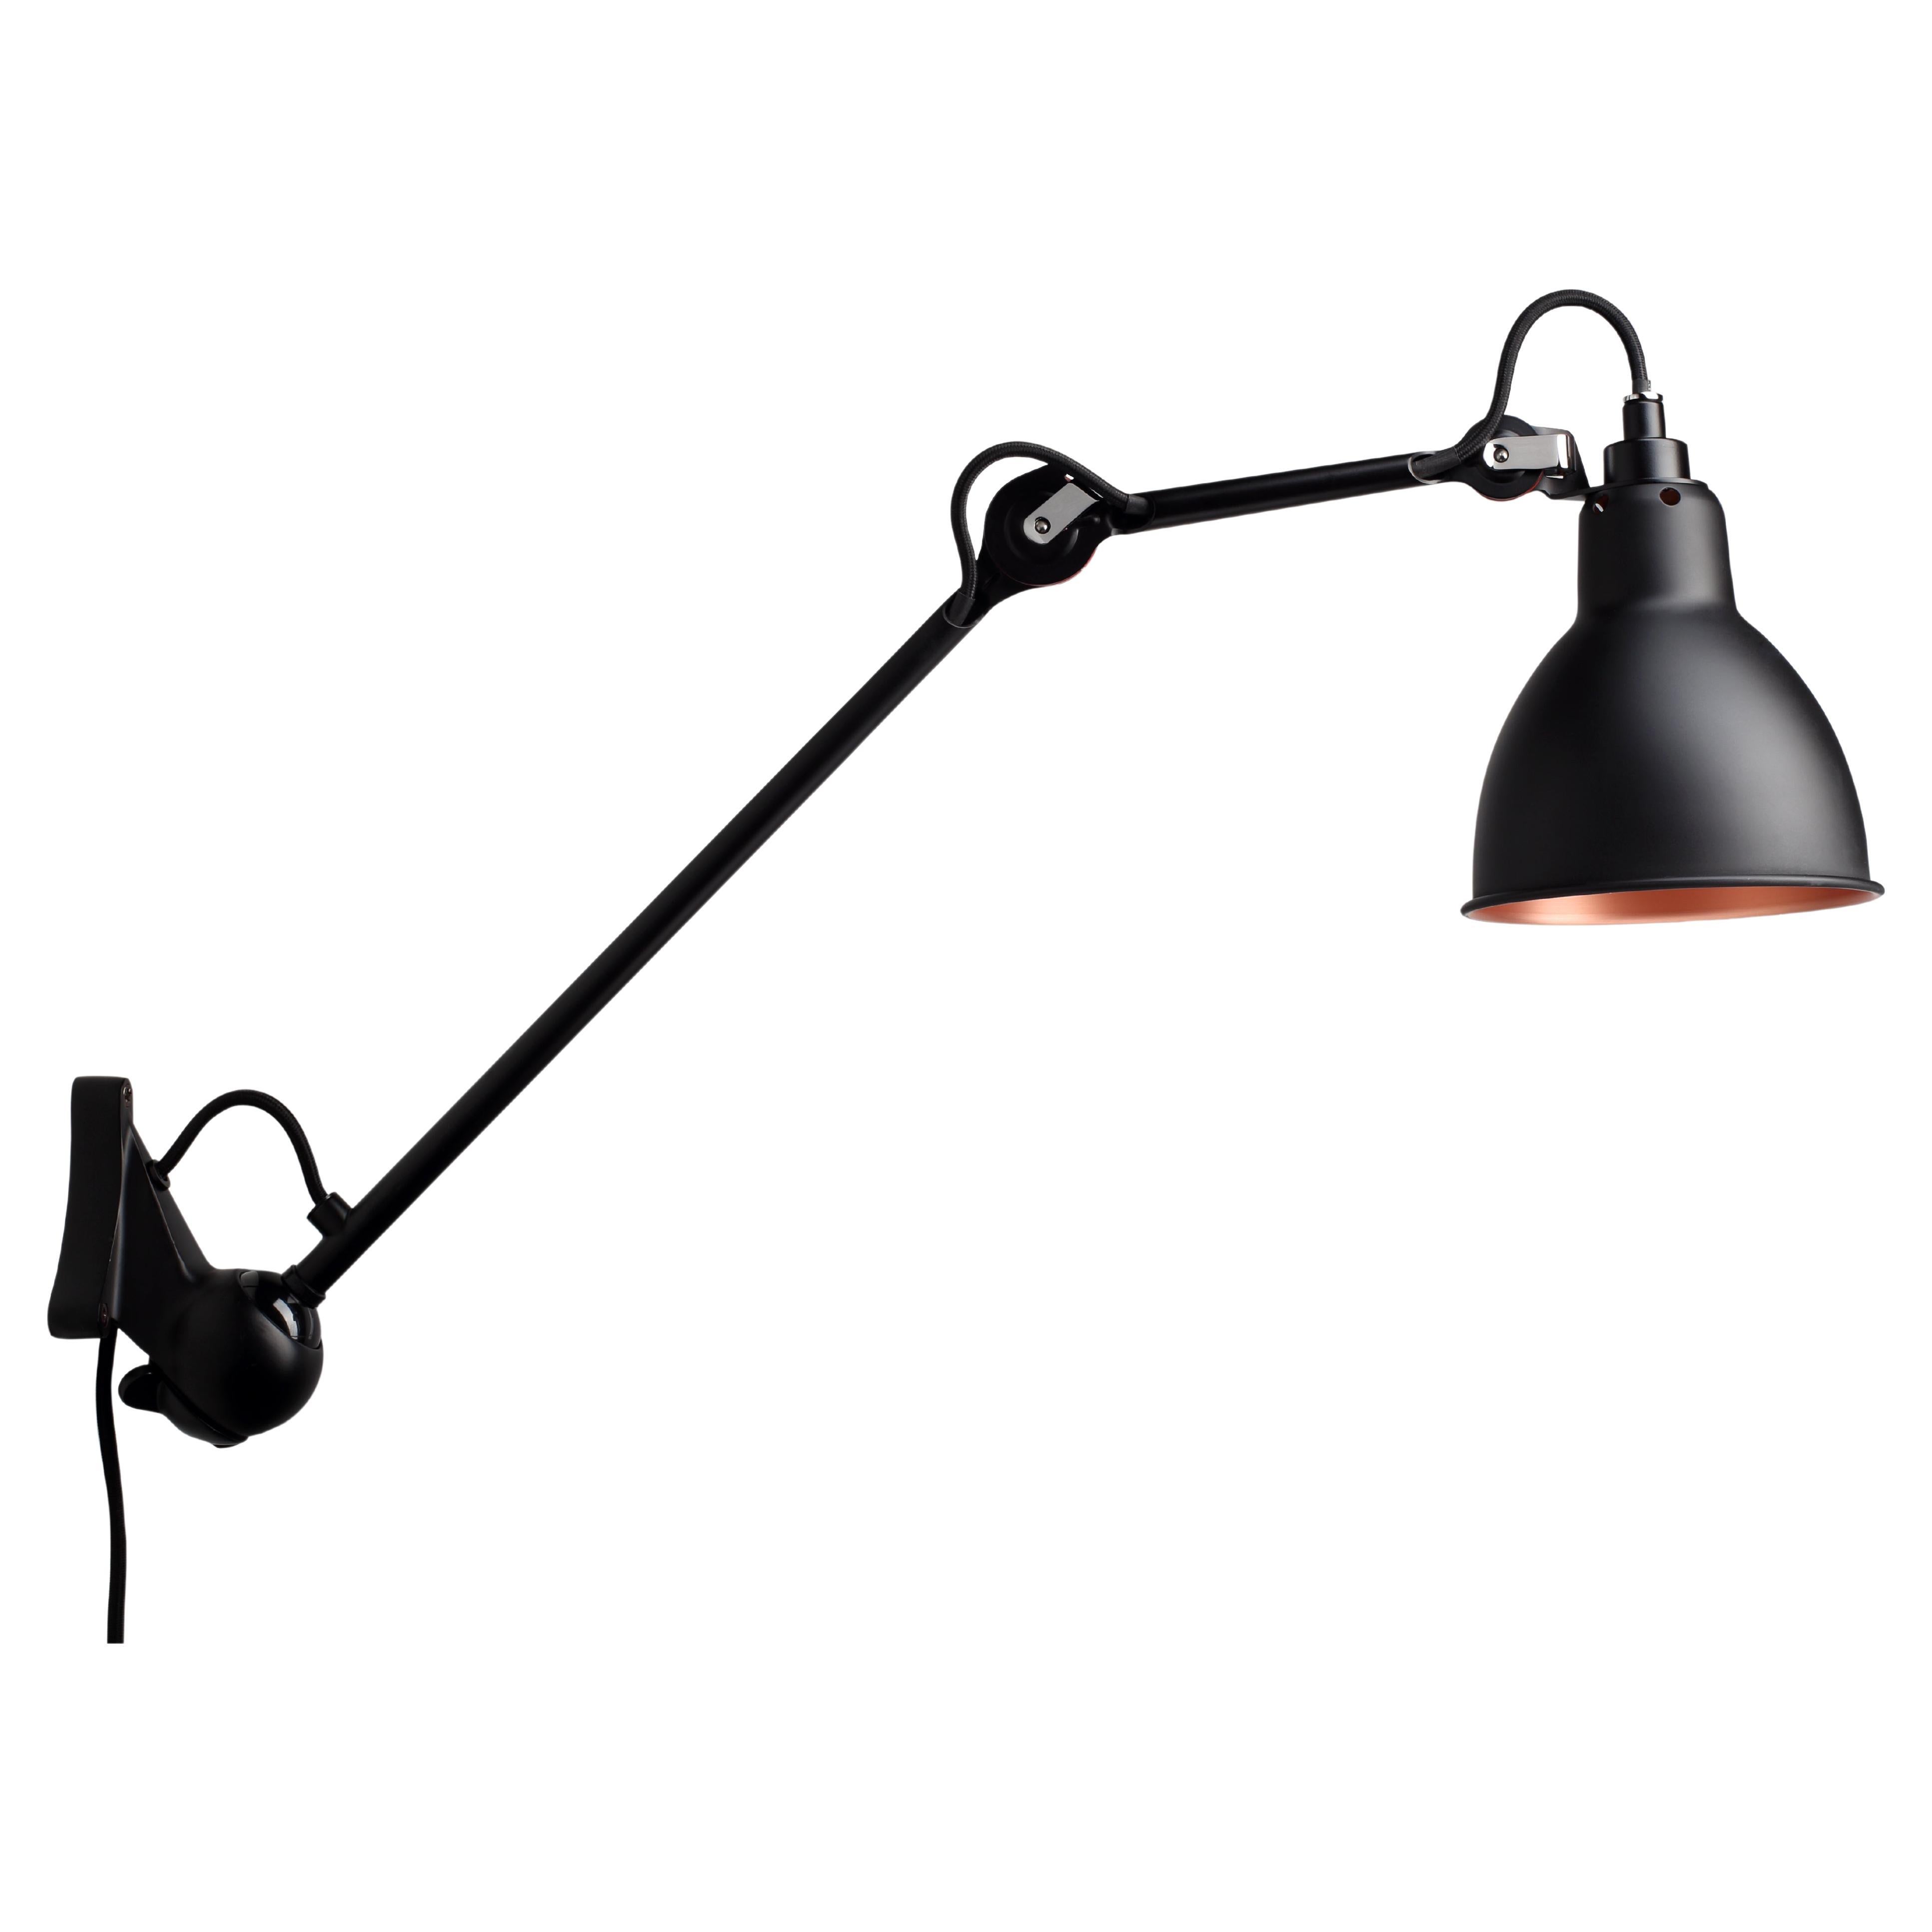 DCW Editions La Lampe Gras N°222 Wall Lamp in Black Arm and Black Copper Shade